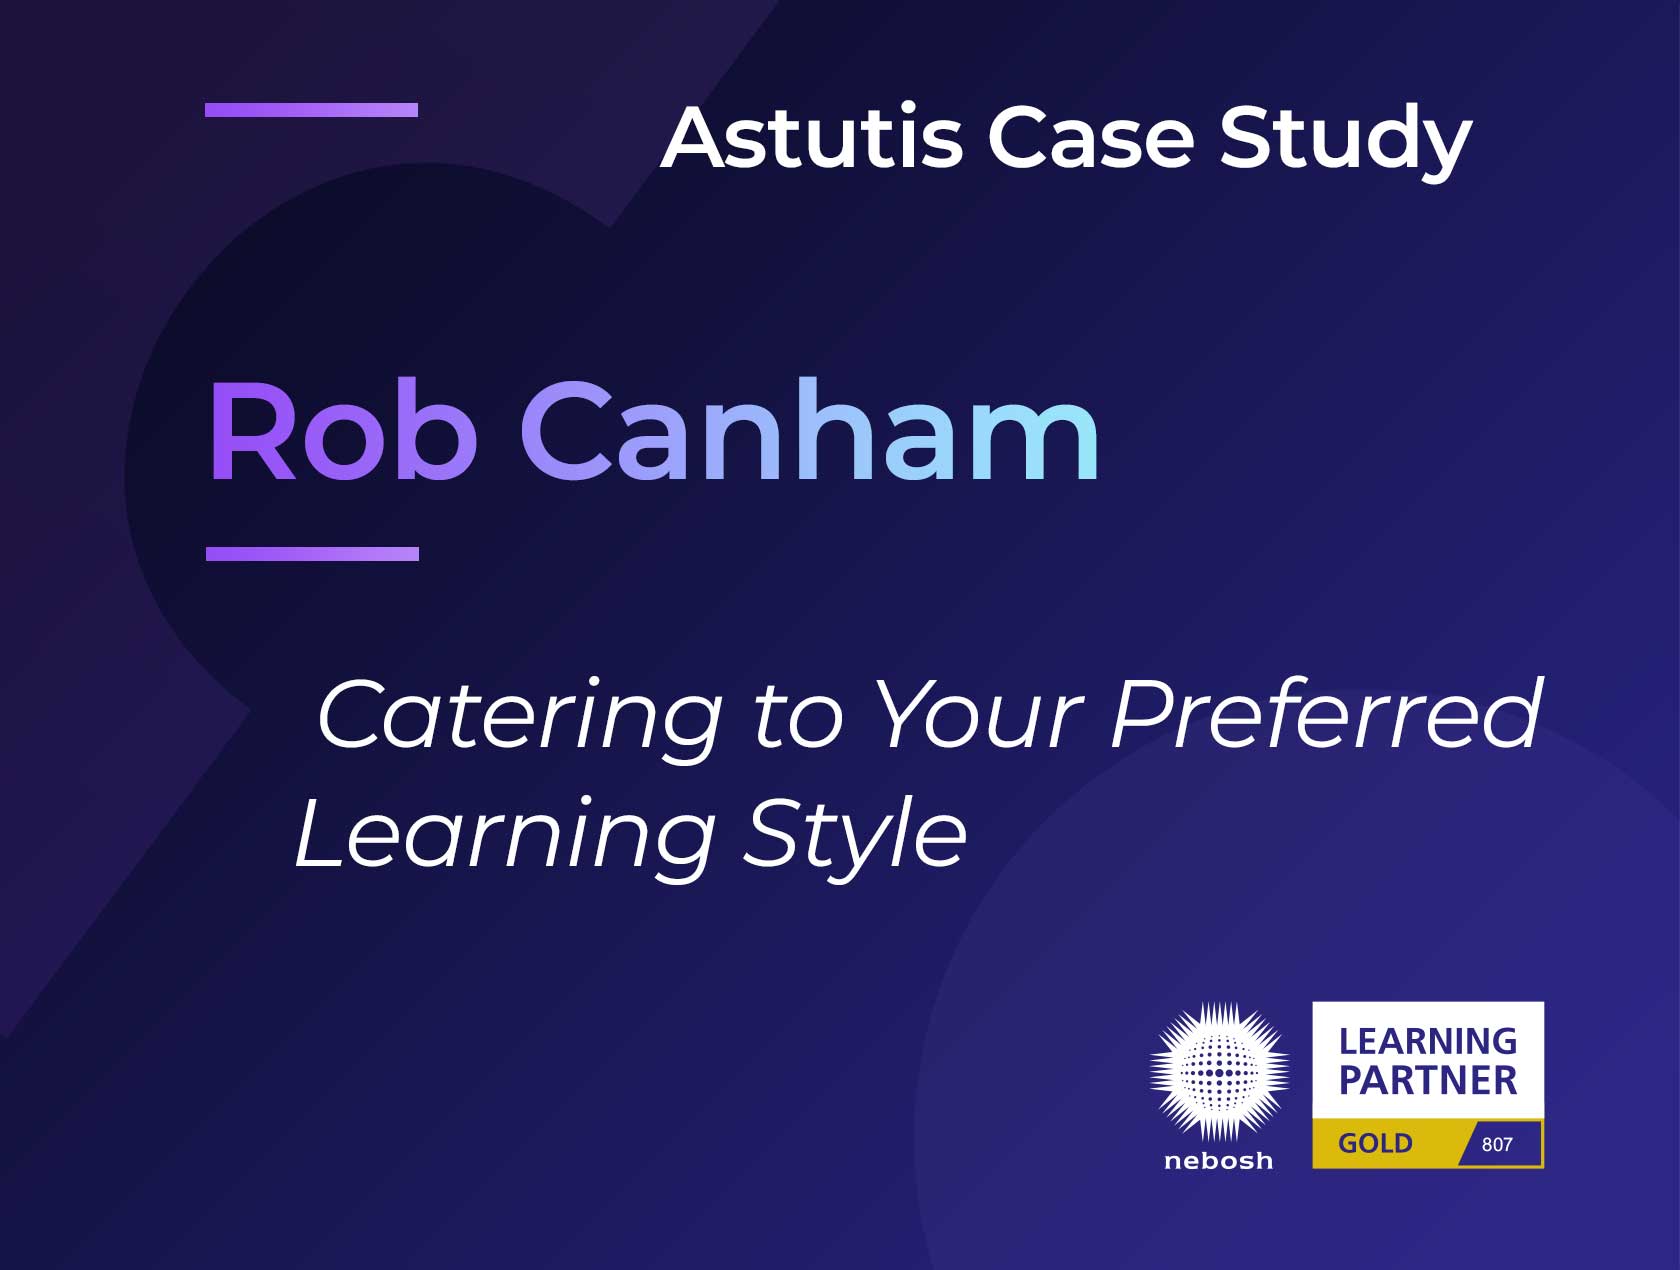 Rob Canham: Catering to Your Preferred Learning Style Image